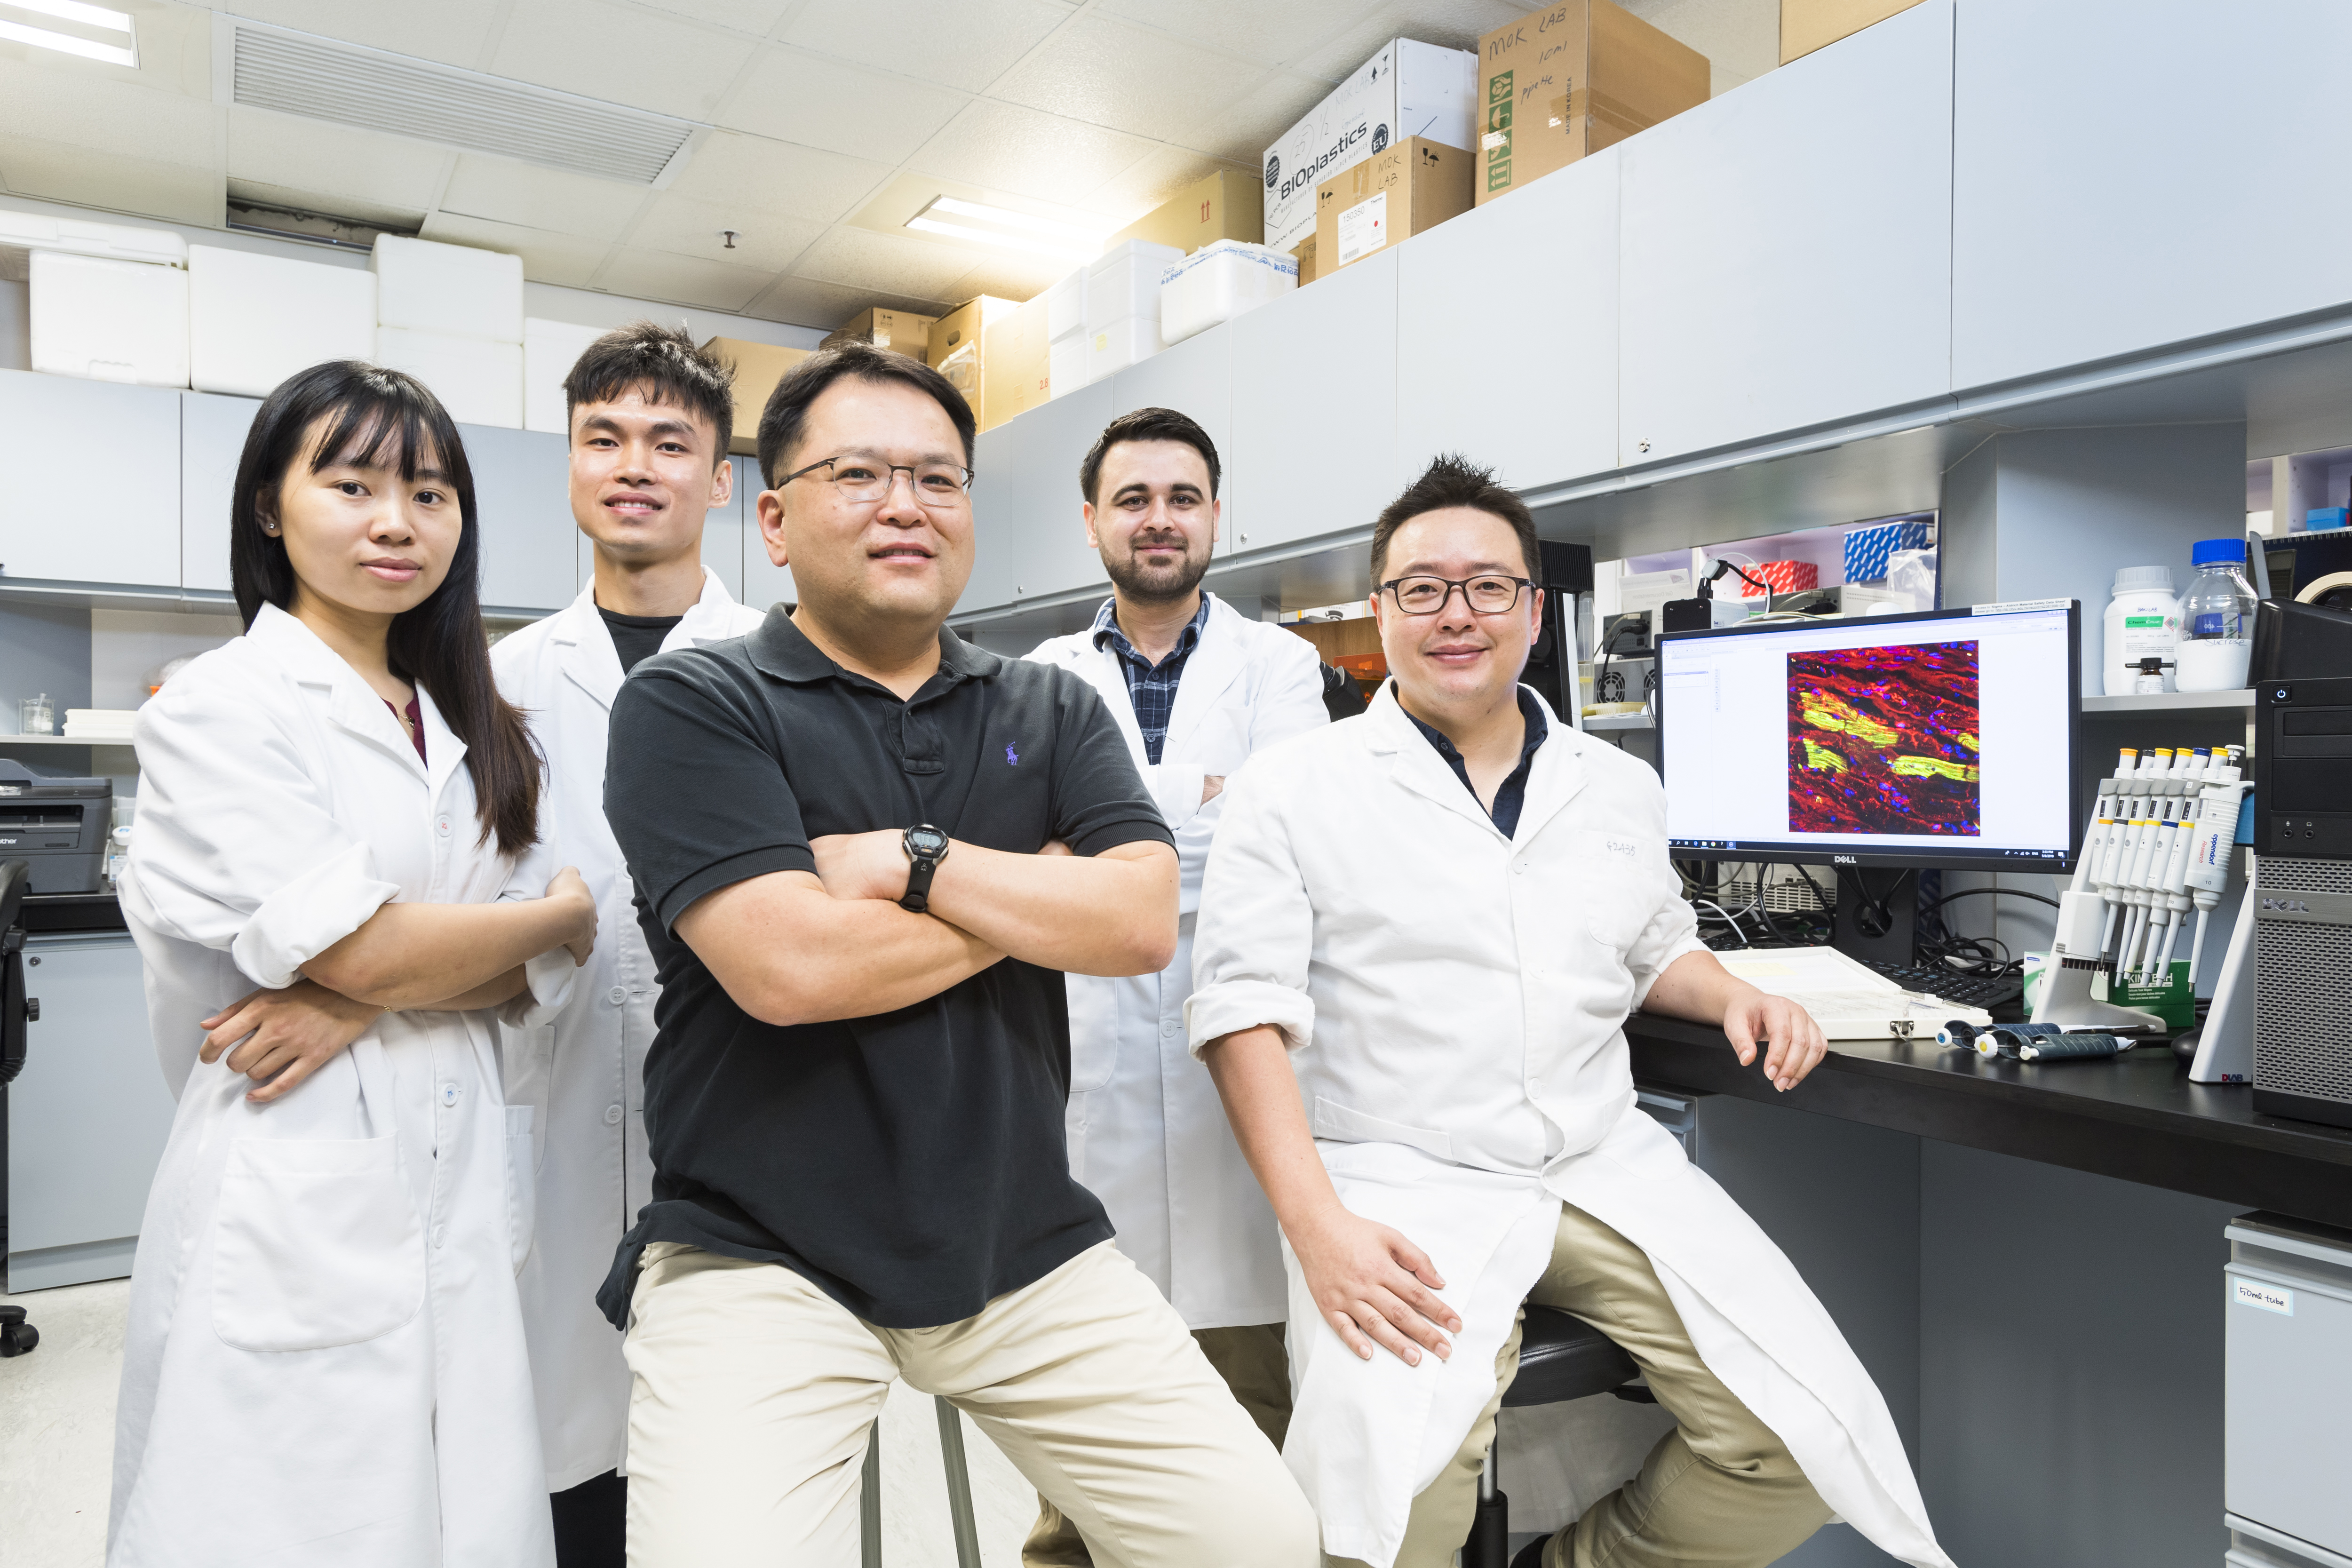 Dr Ban (front middle), PhD student Lee Sunghun (front right) and their research team members from CityU.